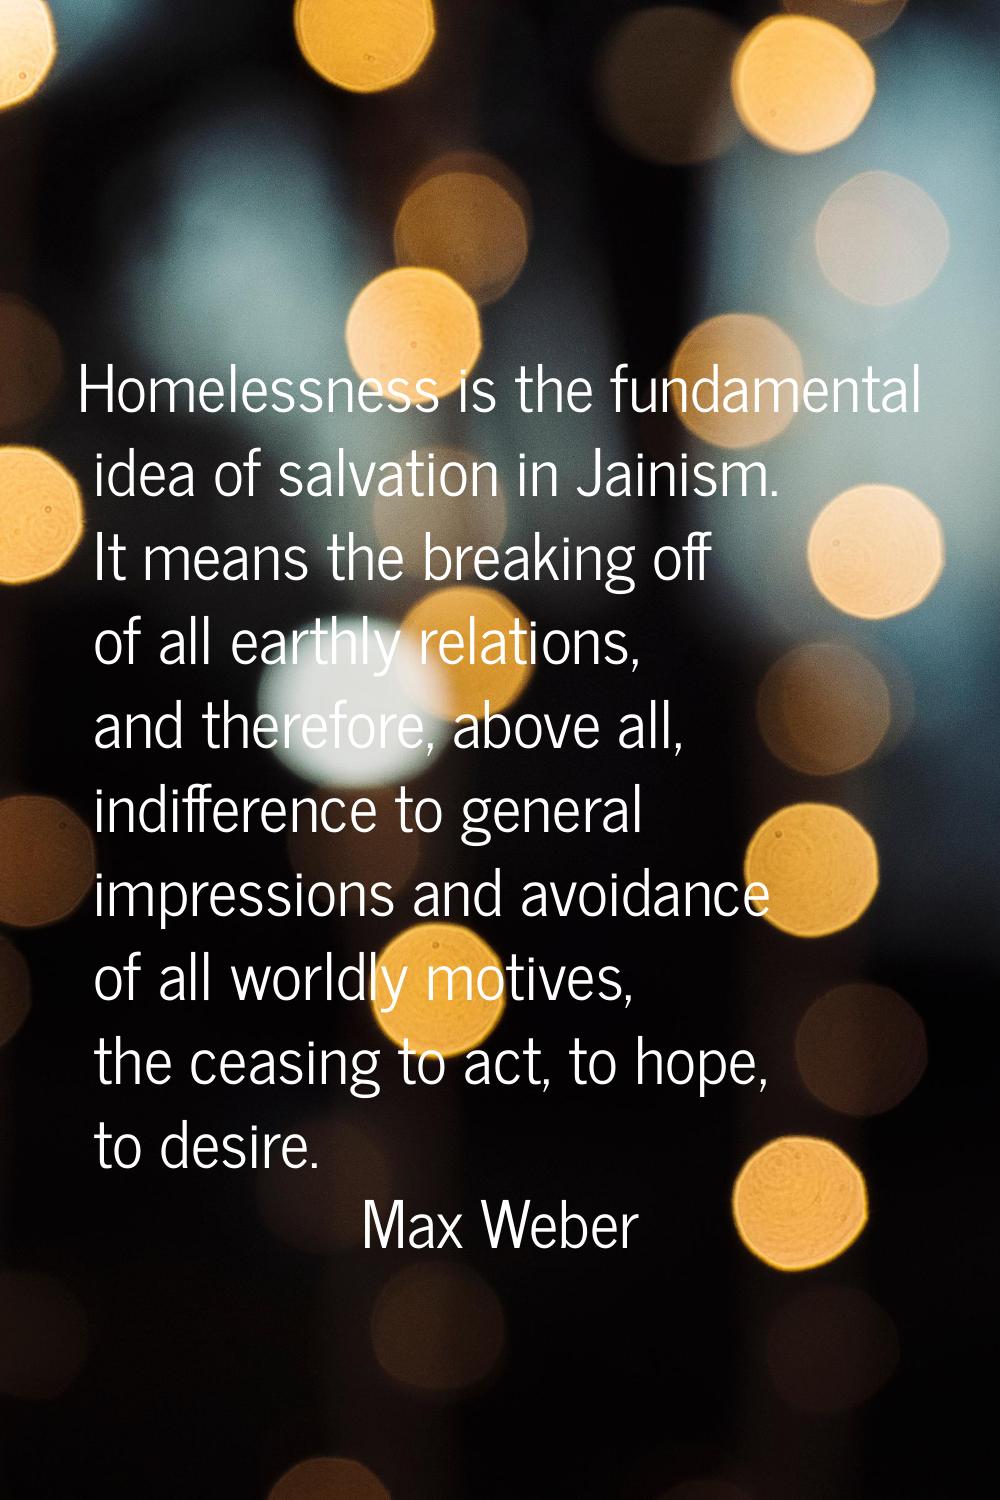 Homelessness is the fundamental idea of salvation in Jainism. It means the breaking off of all eart